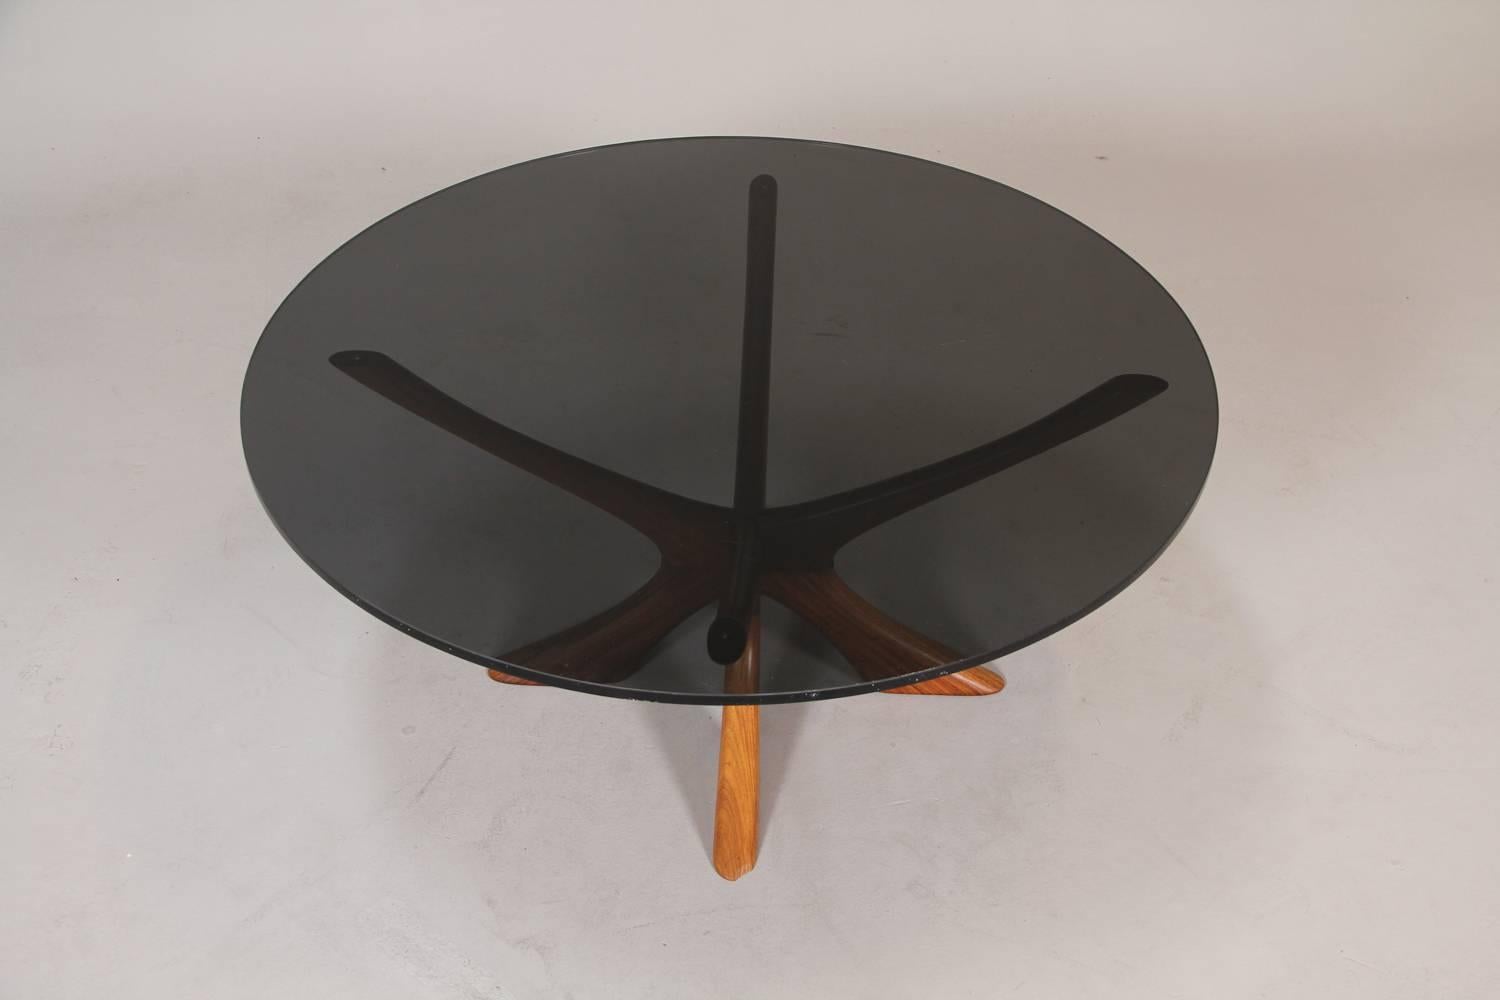 Designed by Illum Wikkelso and made by Silkeborg, thi round rosewood side table was made in Denmark during the 1960s. The rosewood base carries a smoked-grey colour glass top. The table with is 41cm high and 94.5cm in diameter. 

There are a few